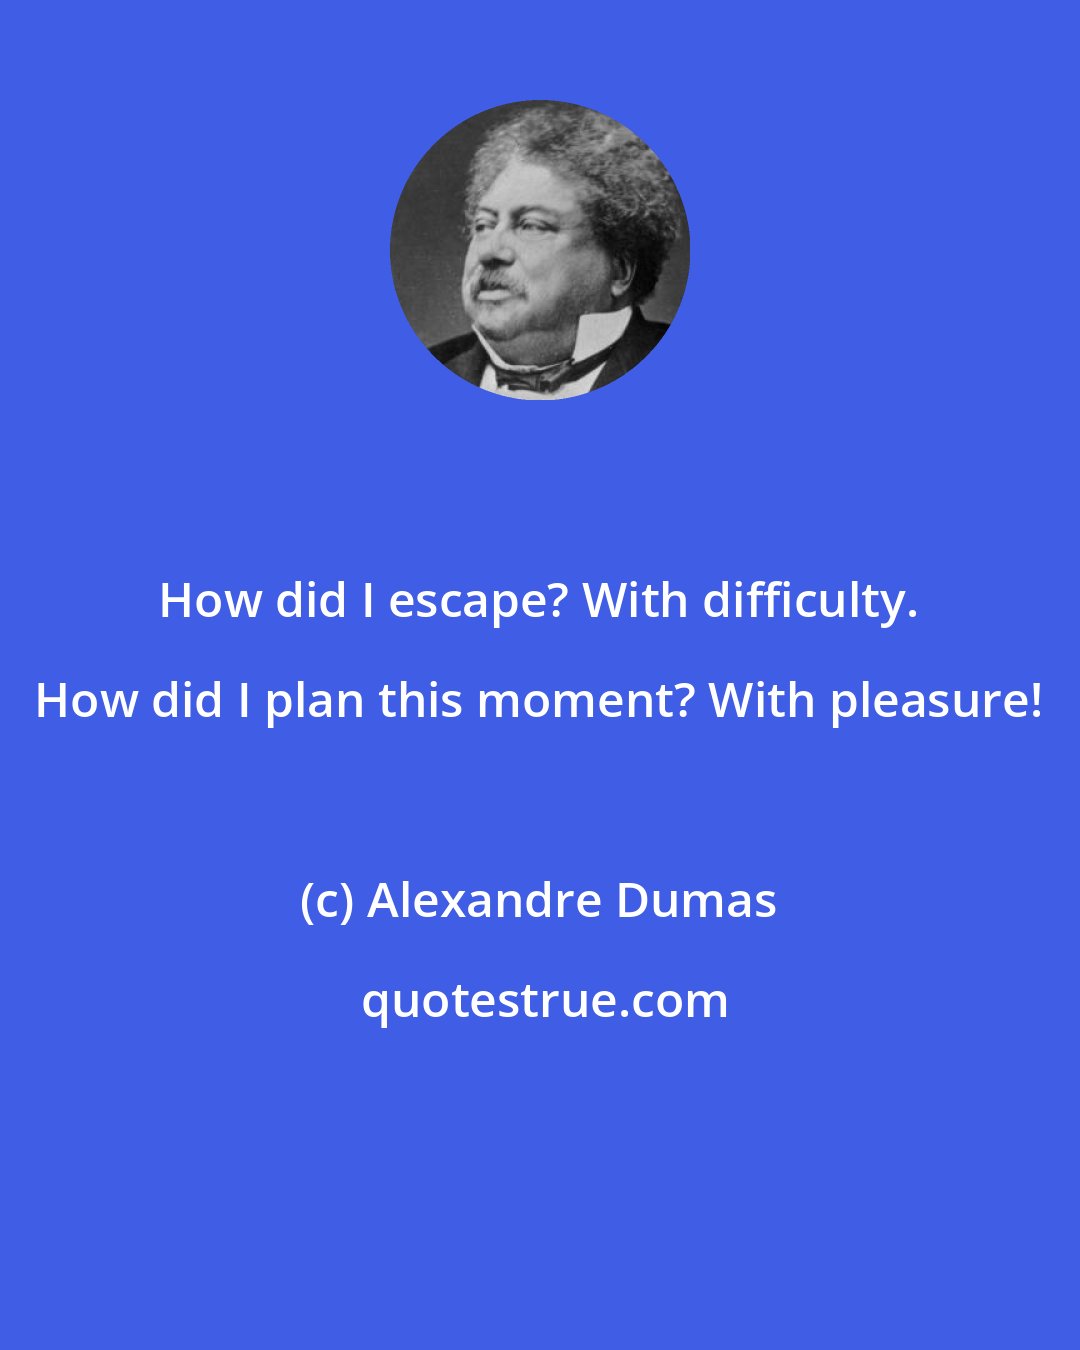 Alexandre Dumas: How did I escape? With difficulty. How did I plan this moment? With pleasure!